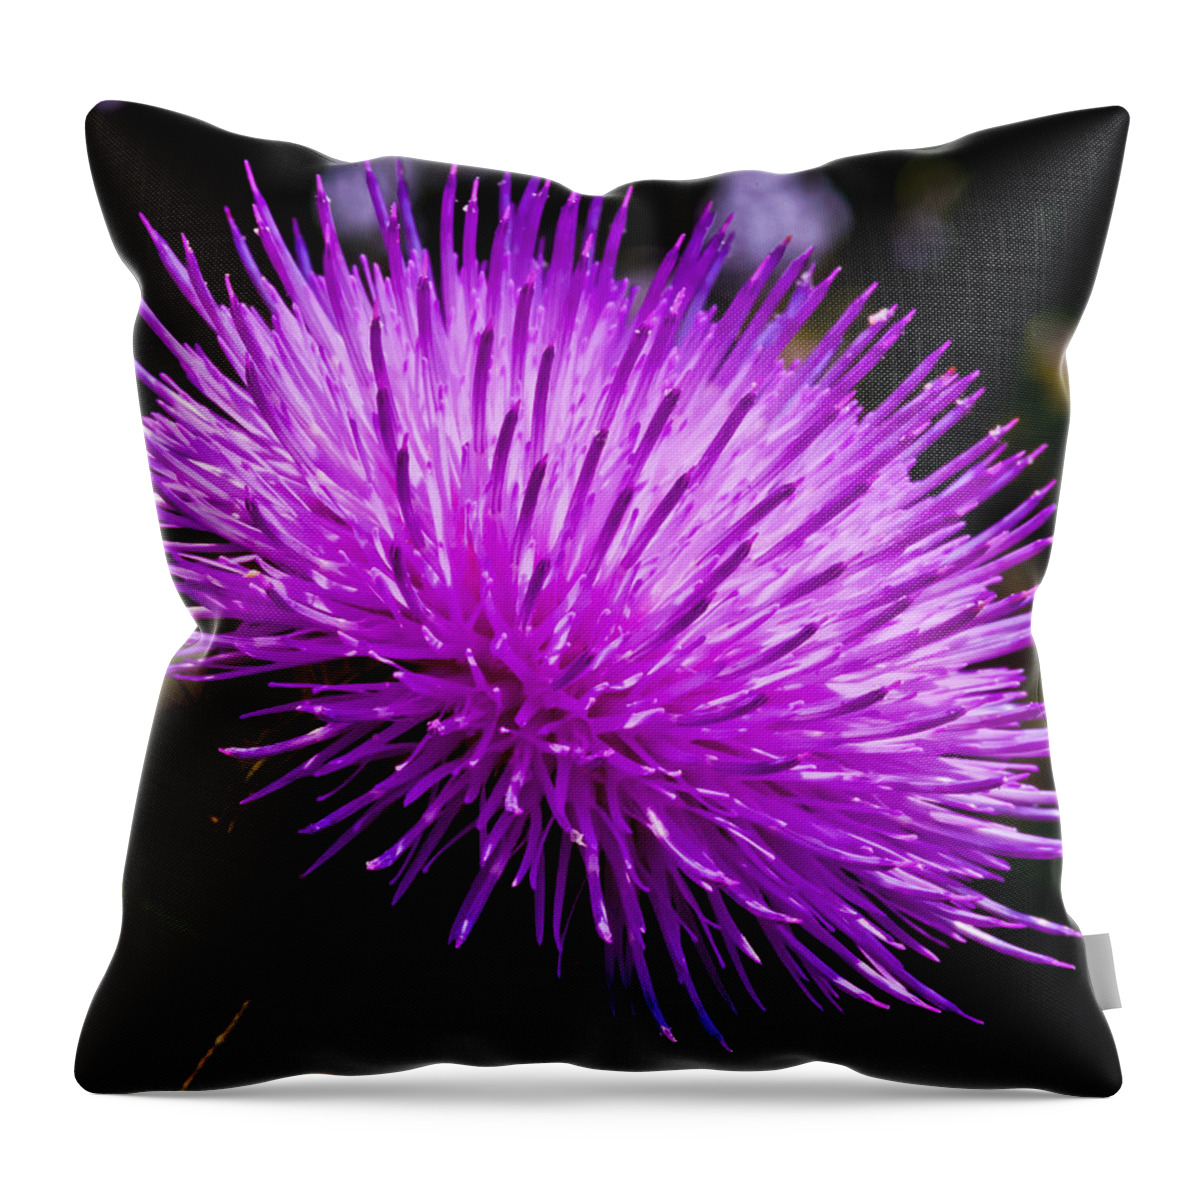 Thistle Throw Pillow featuring the photograph Thistle by Mark Alder